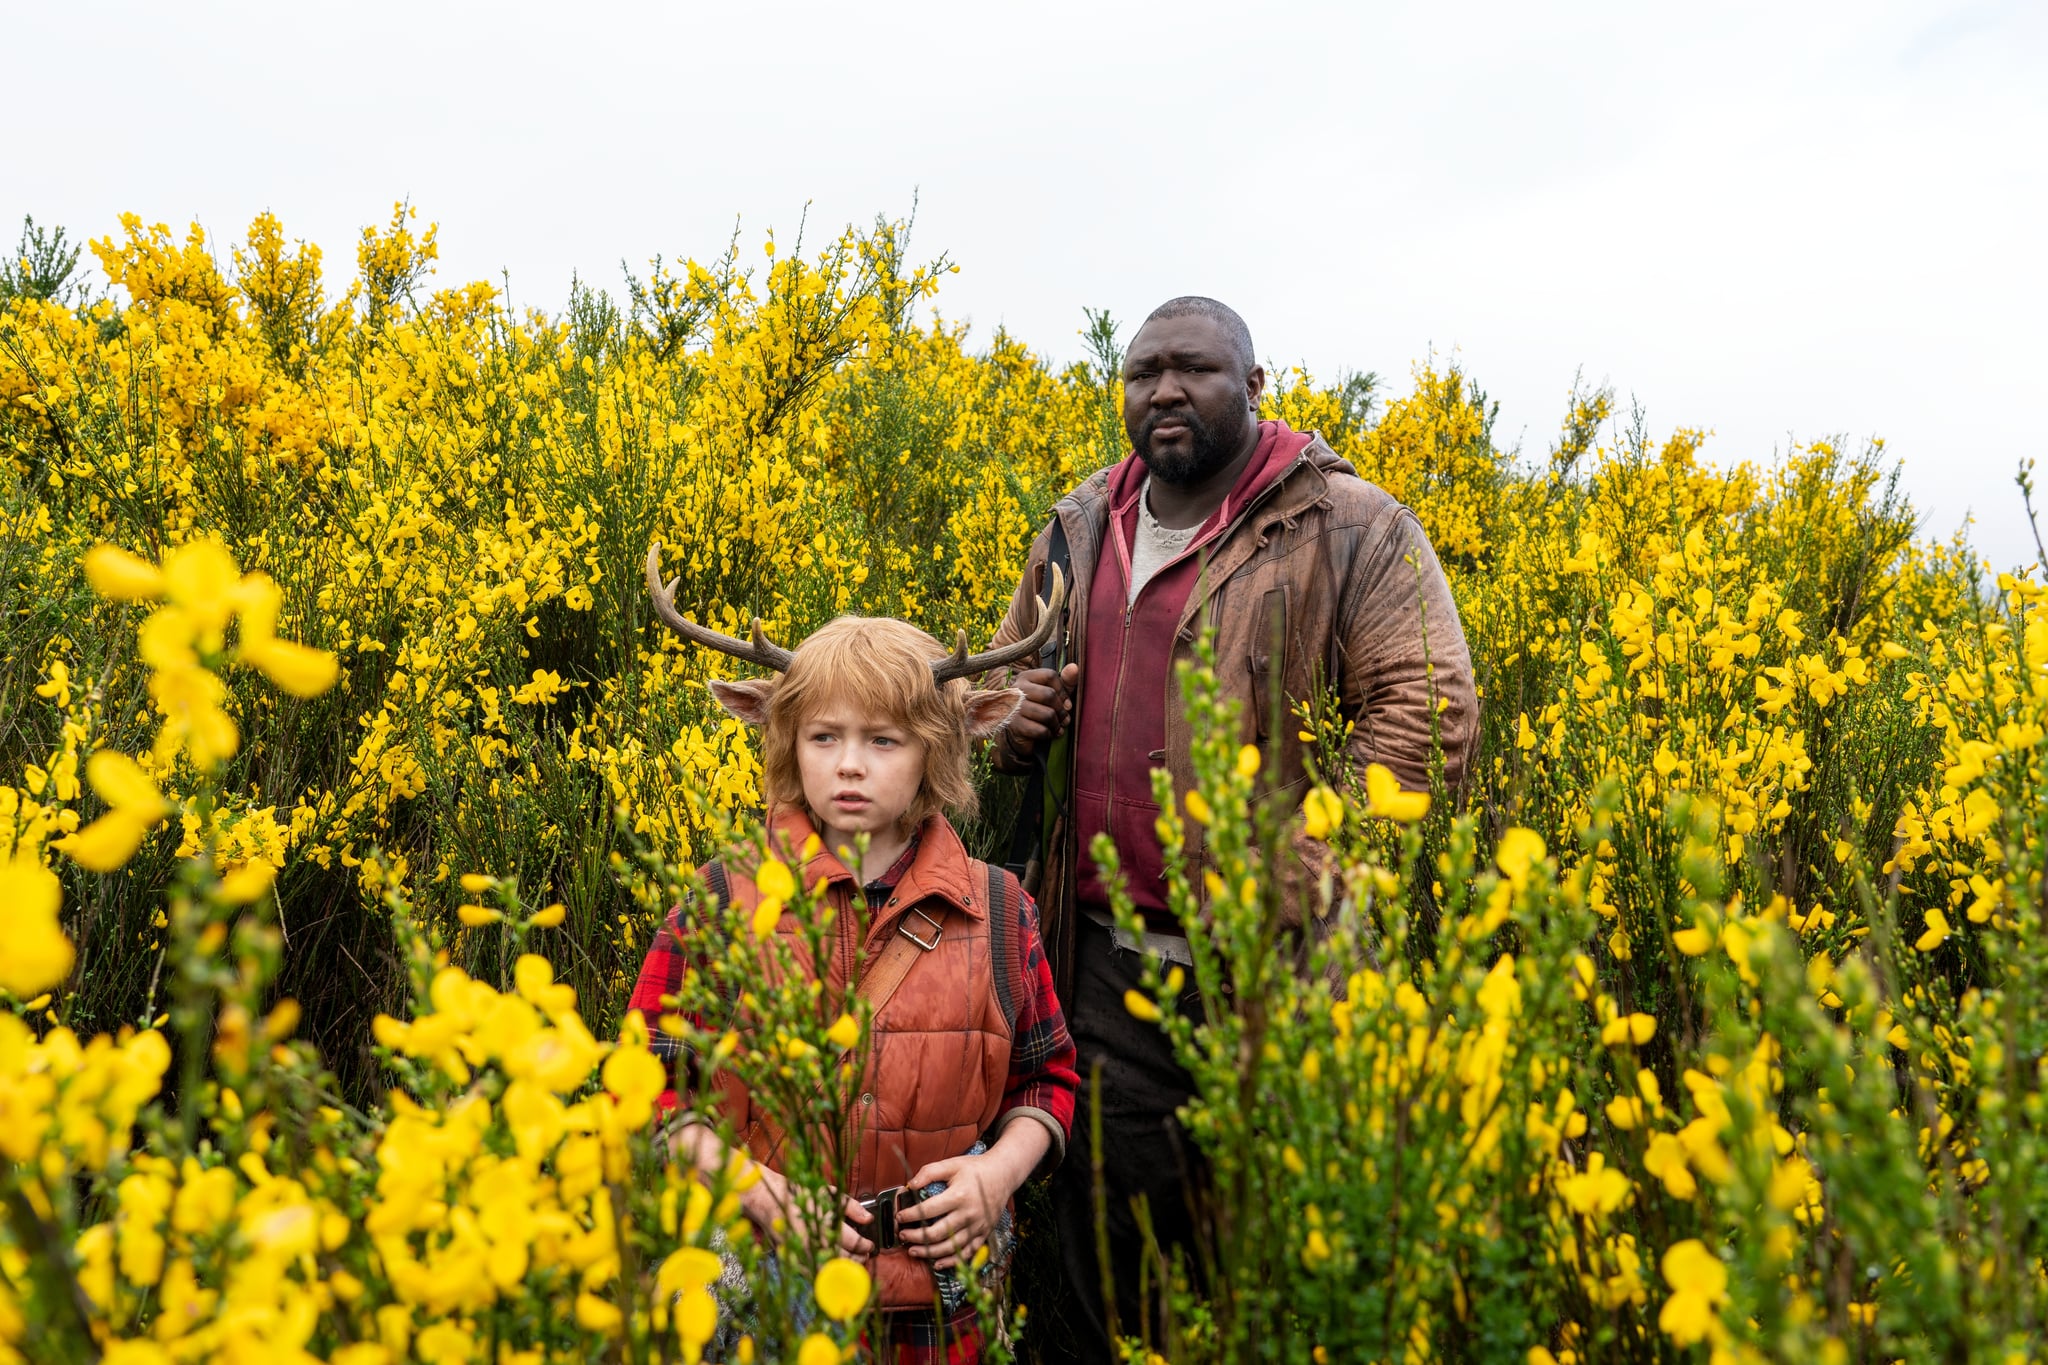 SWEET TOOTH (L to R) CHRISTIAN CONVERY as GUS and NONSO ANOZIE as TOMMY JEPPERD in episode 102 of SWEET TOOTH Cr. KIRSTY GRIFFIN/NETFLIX  2021